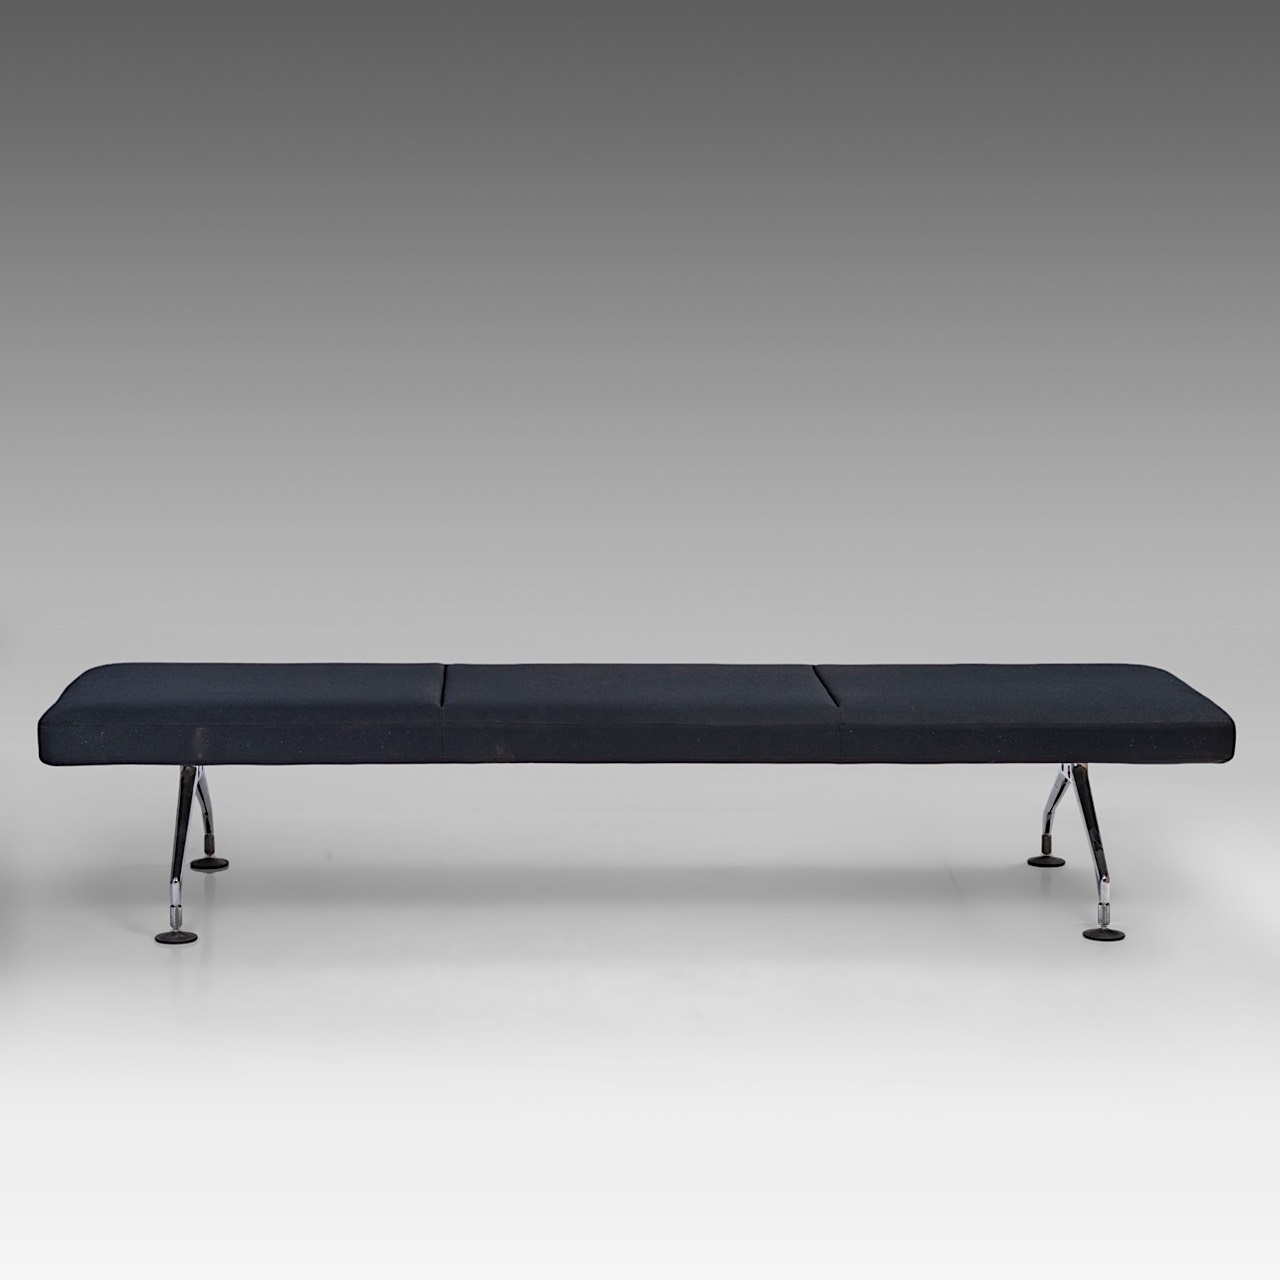 A pair of Antonio Citterio daybeds for Vitra, H 42 - W 222 - D 68 cm - Image 3 of 8